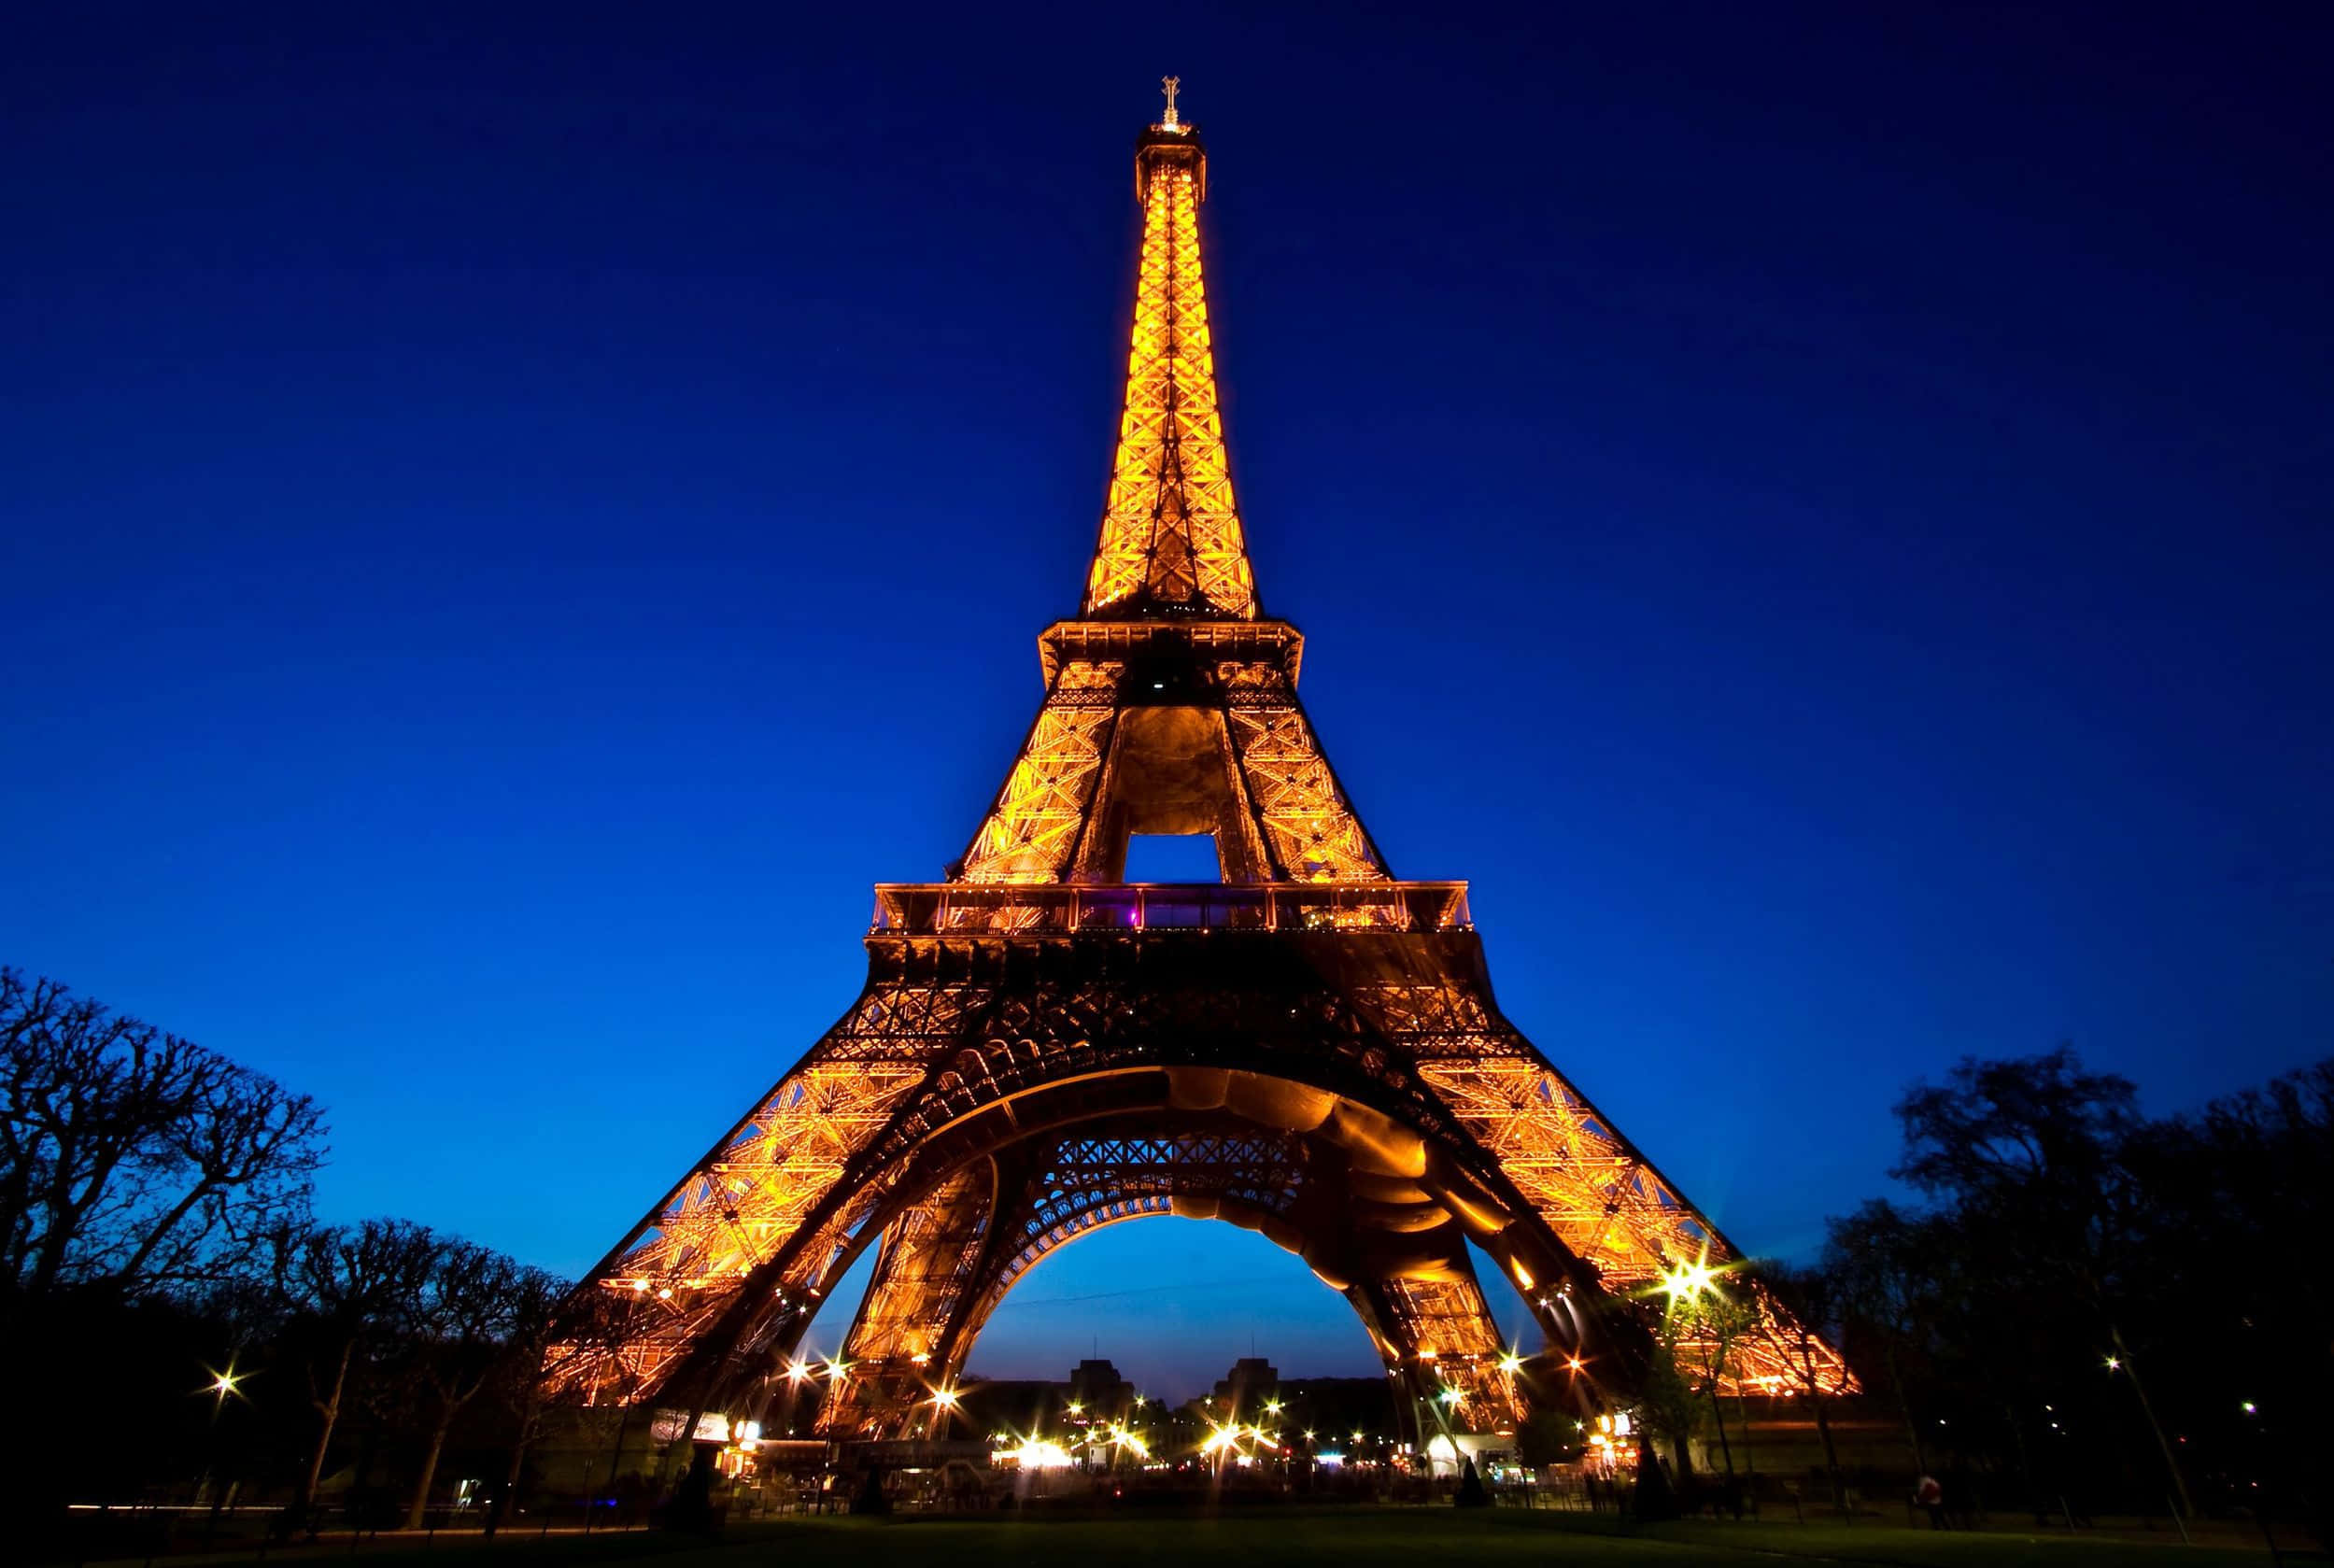 The Eiffel Tower in all its nighttime glory